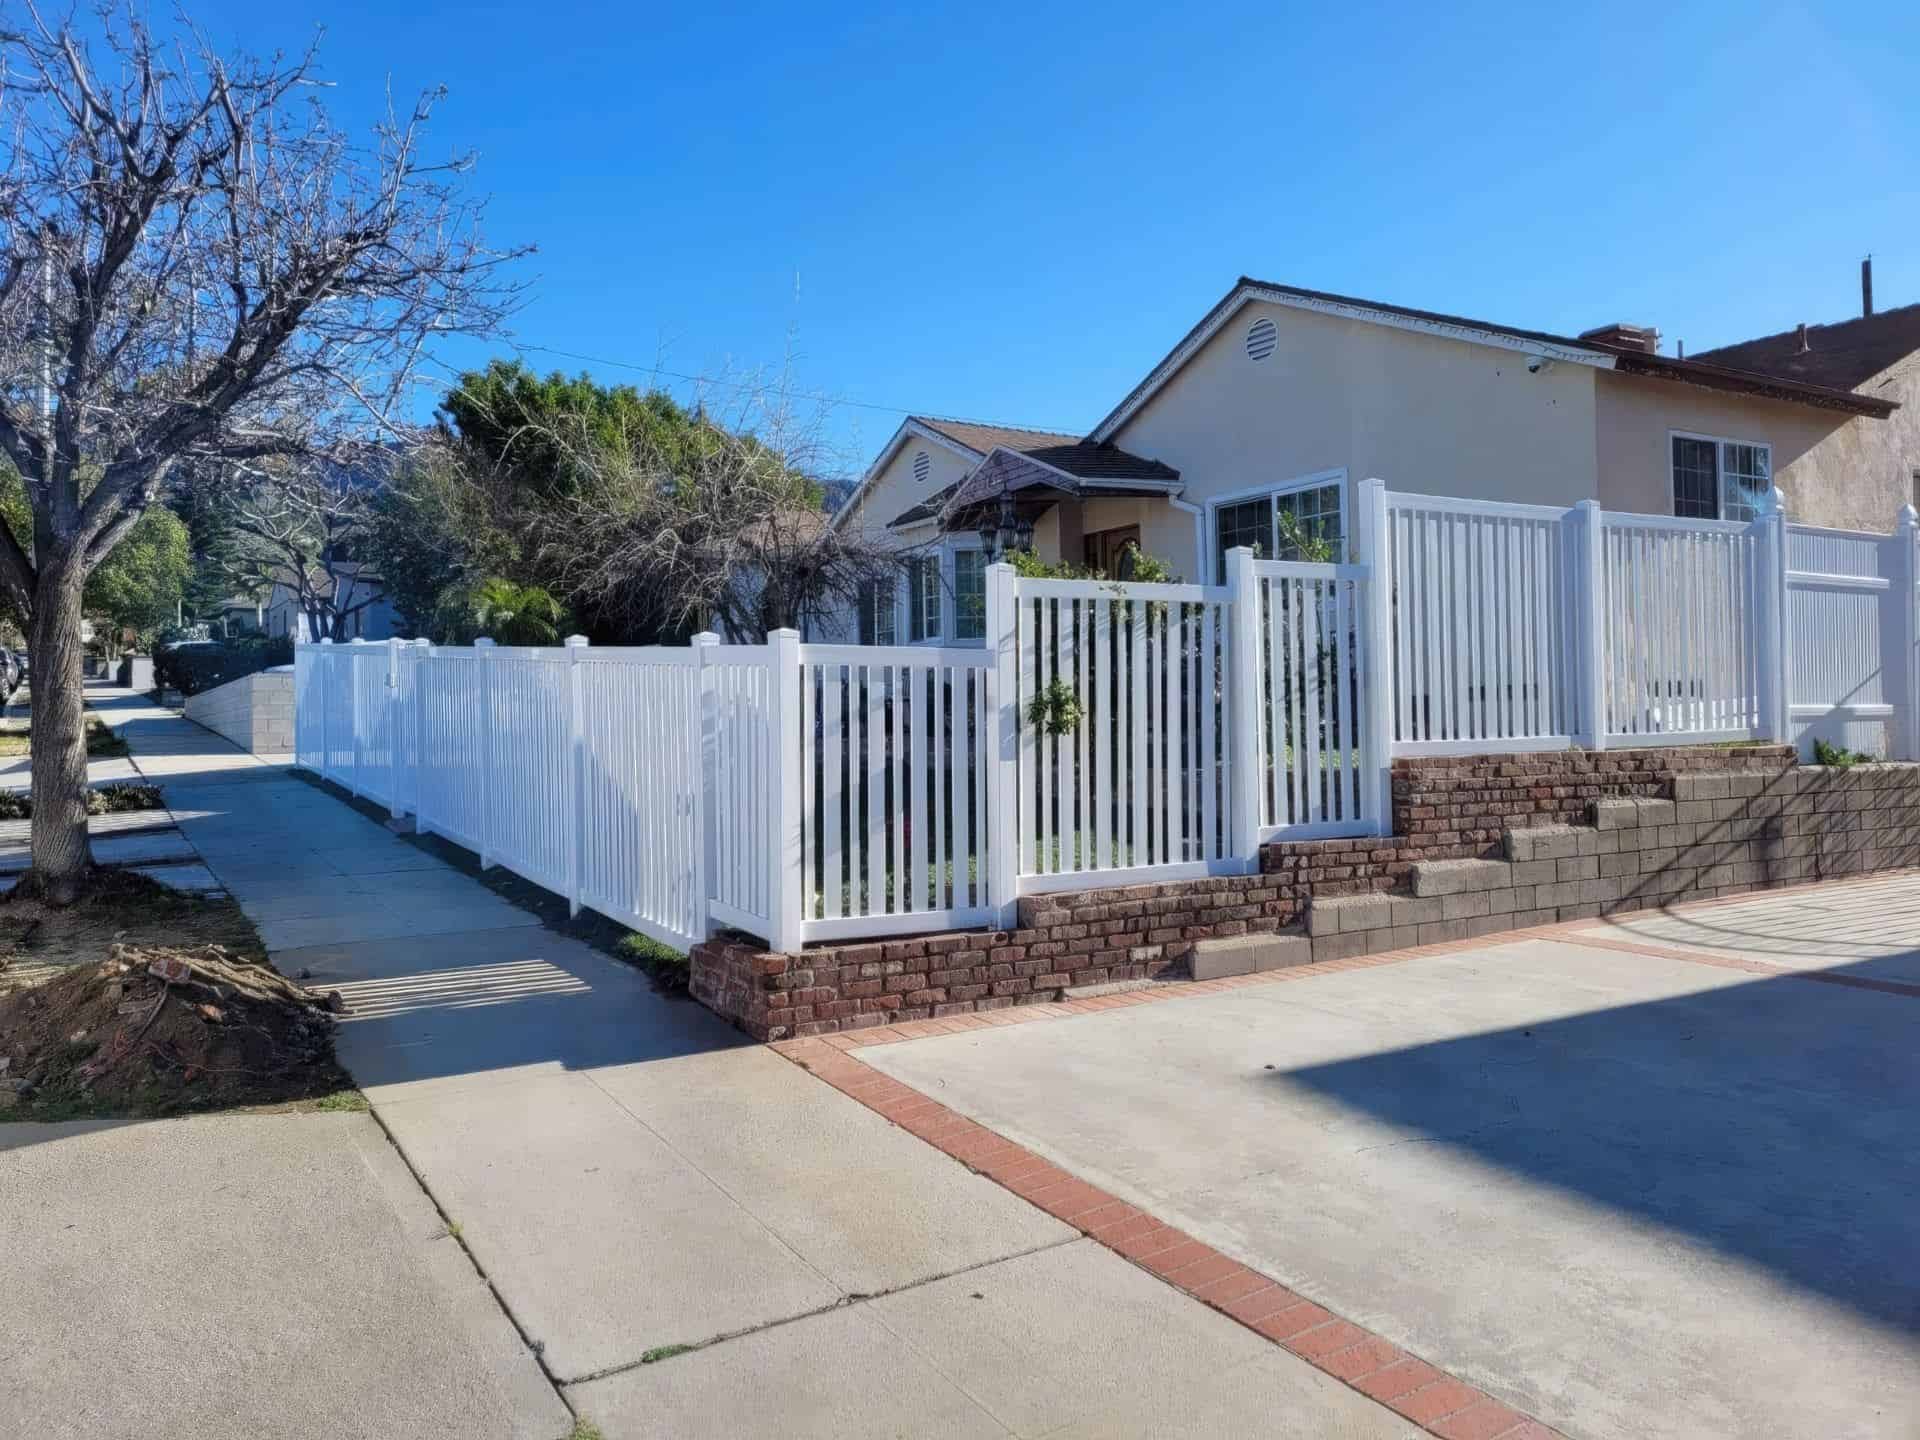 White Vinyl fence on elevated platform beside concrete sidewalk, front lawn, and distant trees create a charming suburban scene.